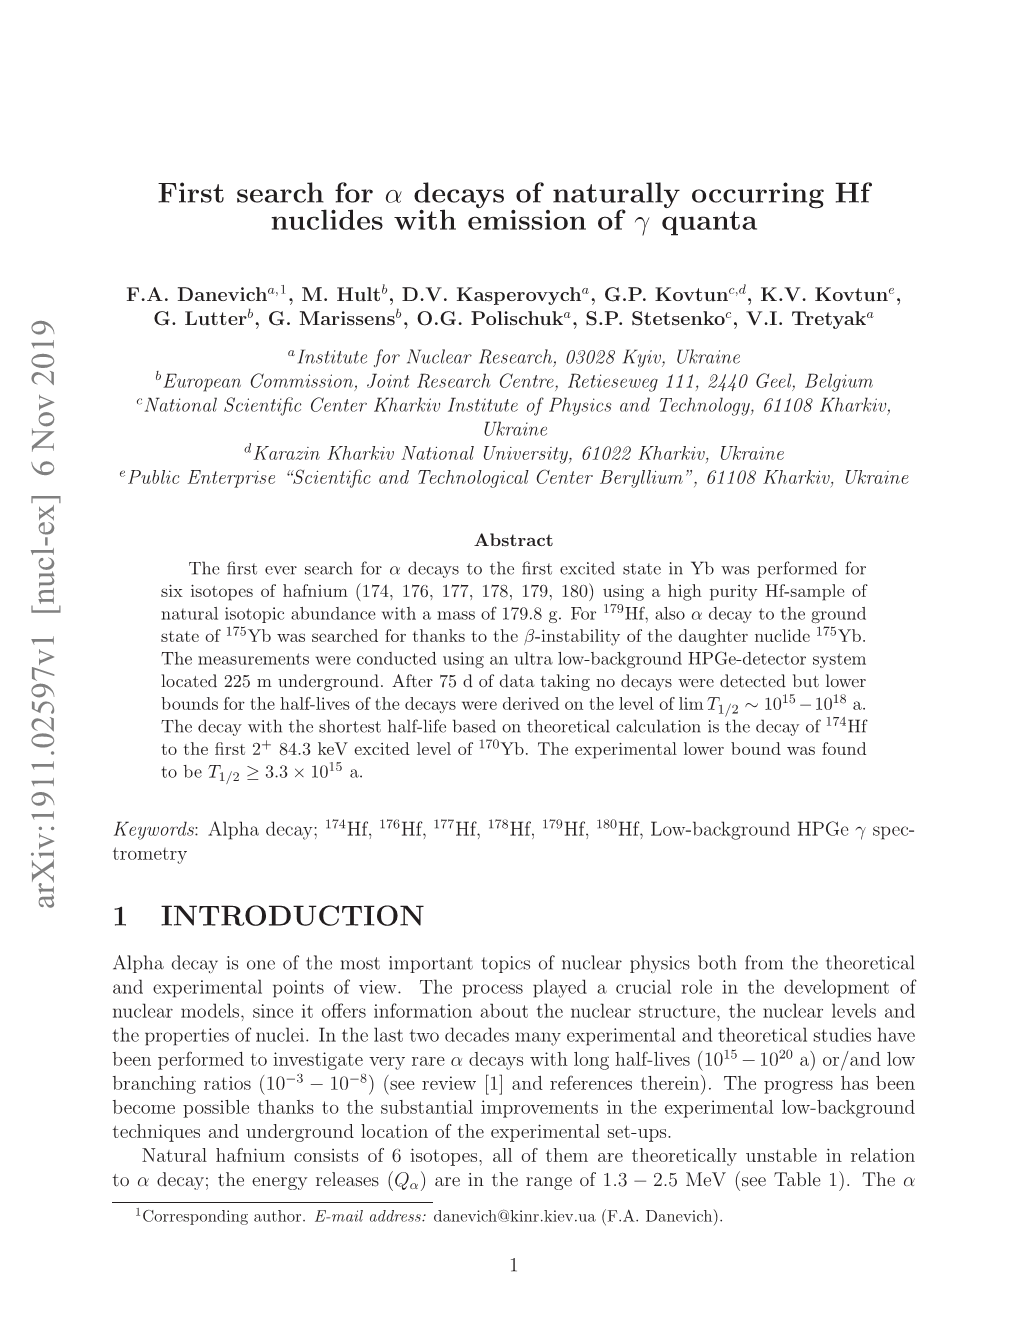 First Search for $\Alpha $ Decays of Naturally Occurring Hf Nuclides With